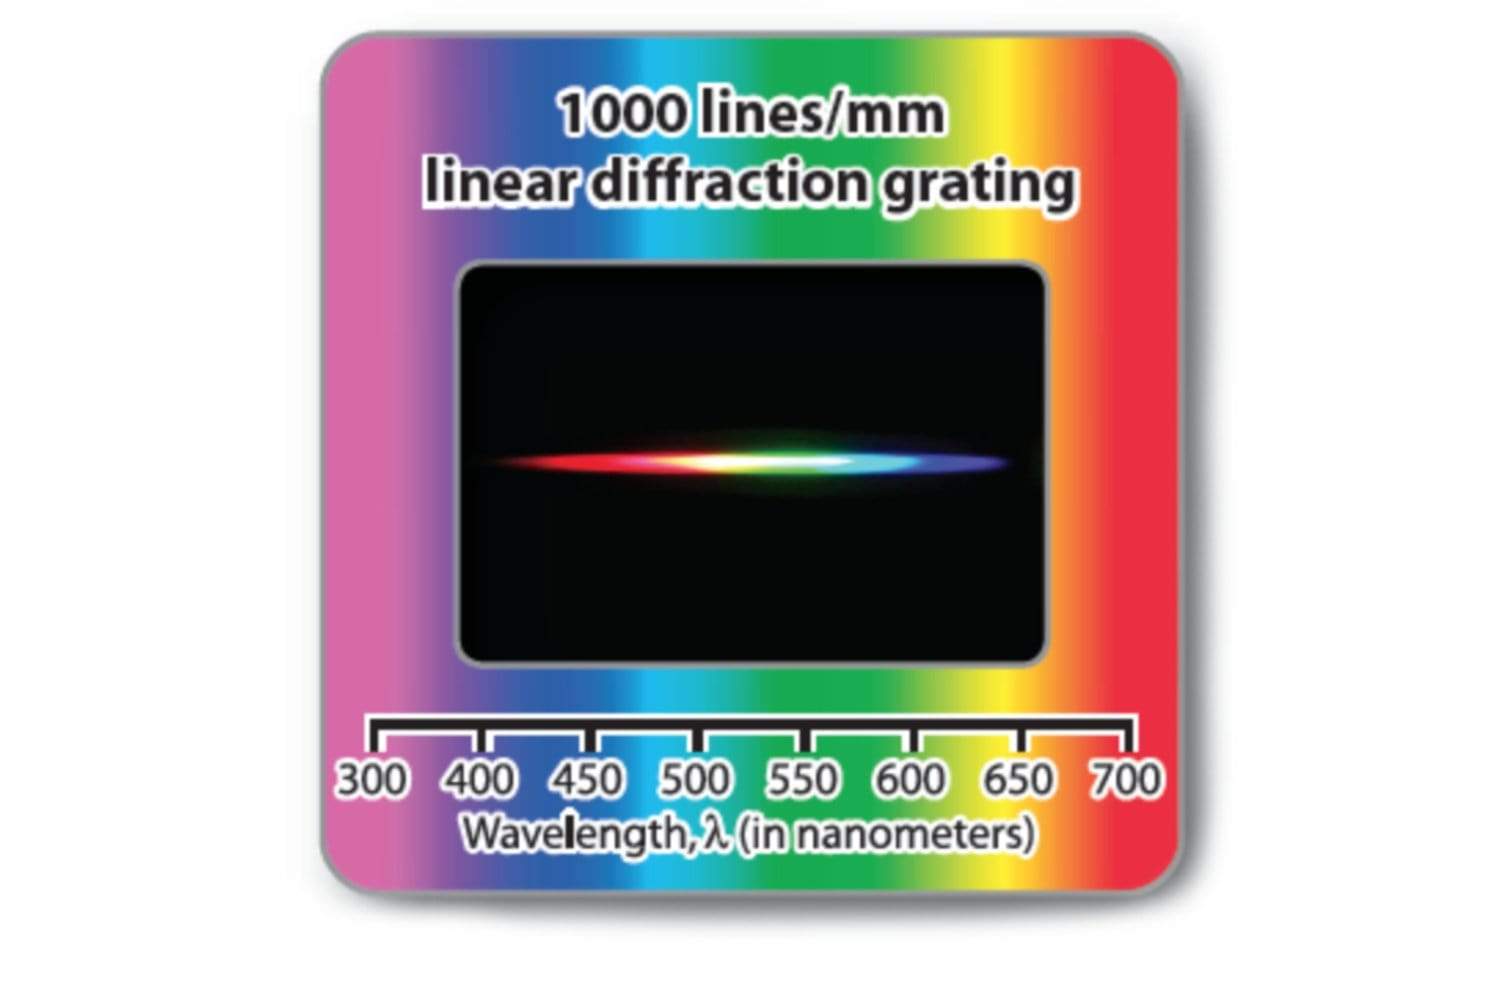 Arbor Scientific Holographic Diffraction Grating 1000 lines/mm 5 Pack